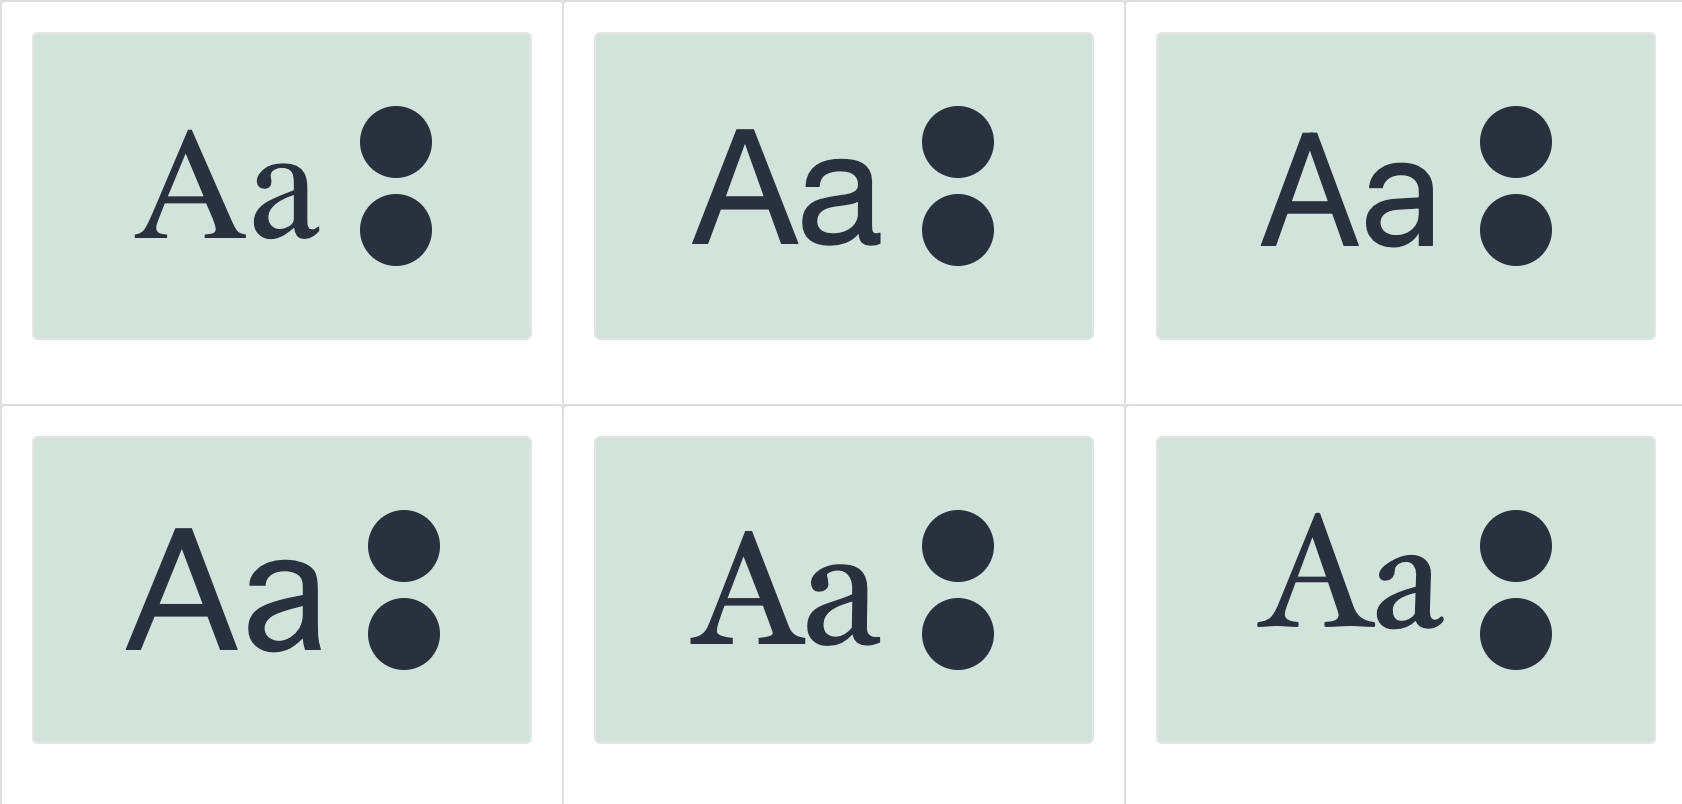 Six different previews of the same text ("Aa") with different font families applied.